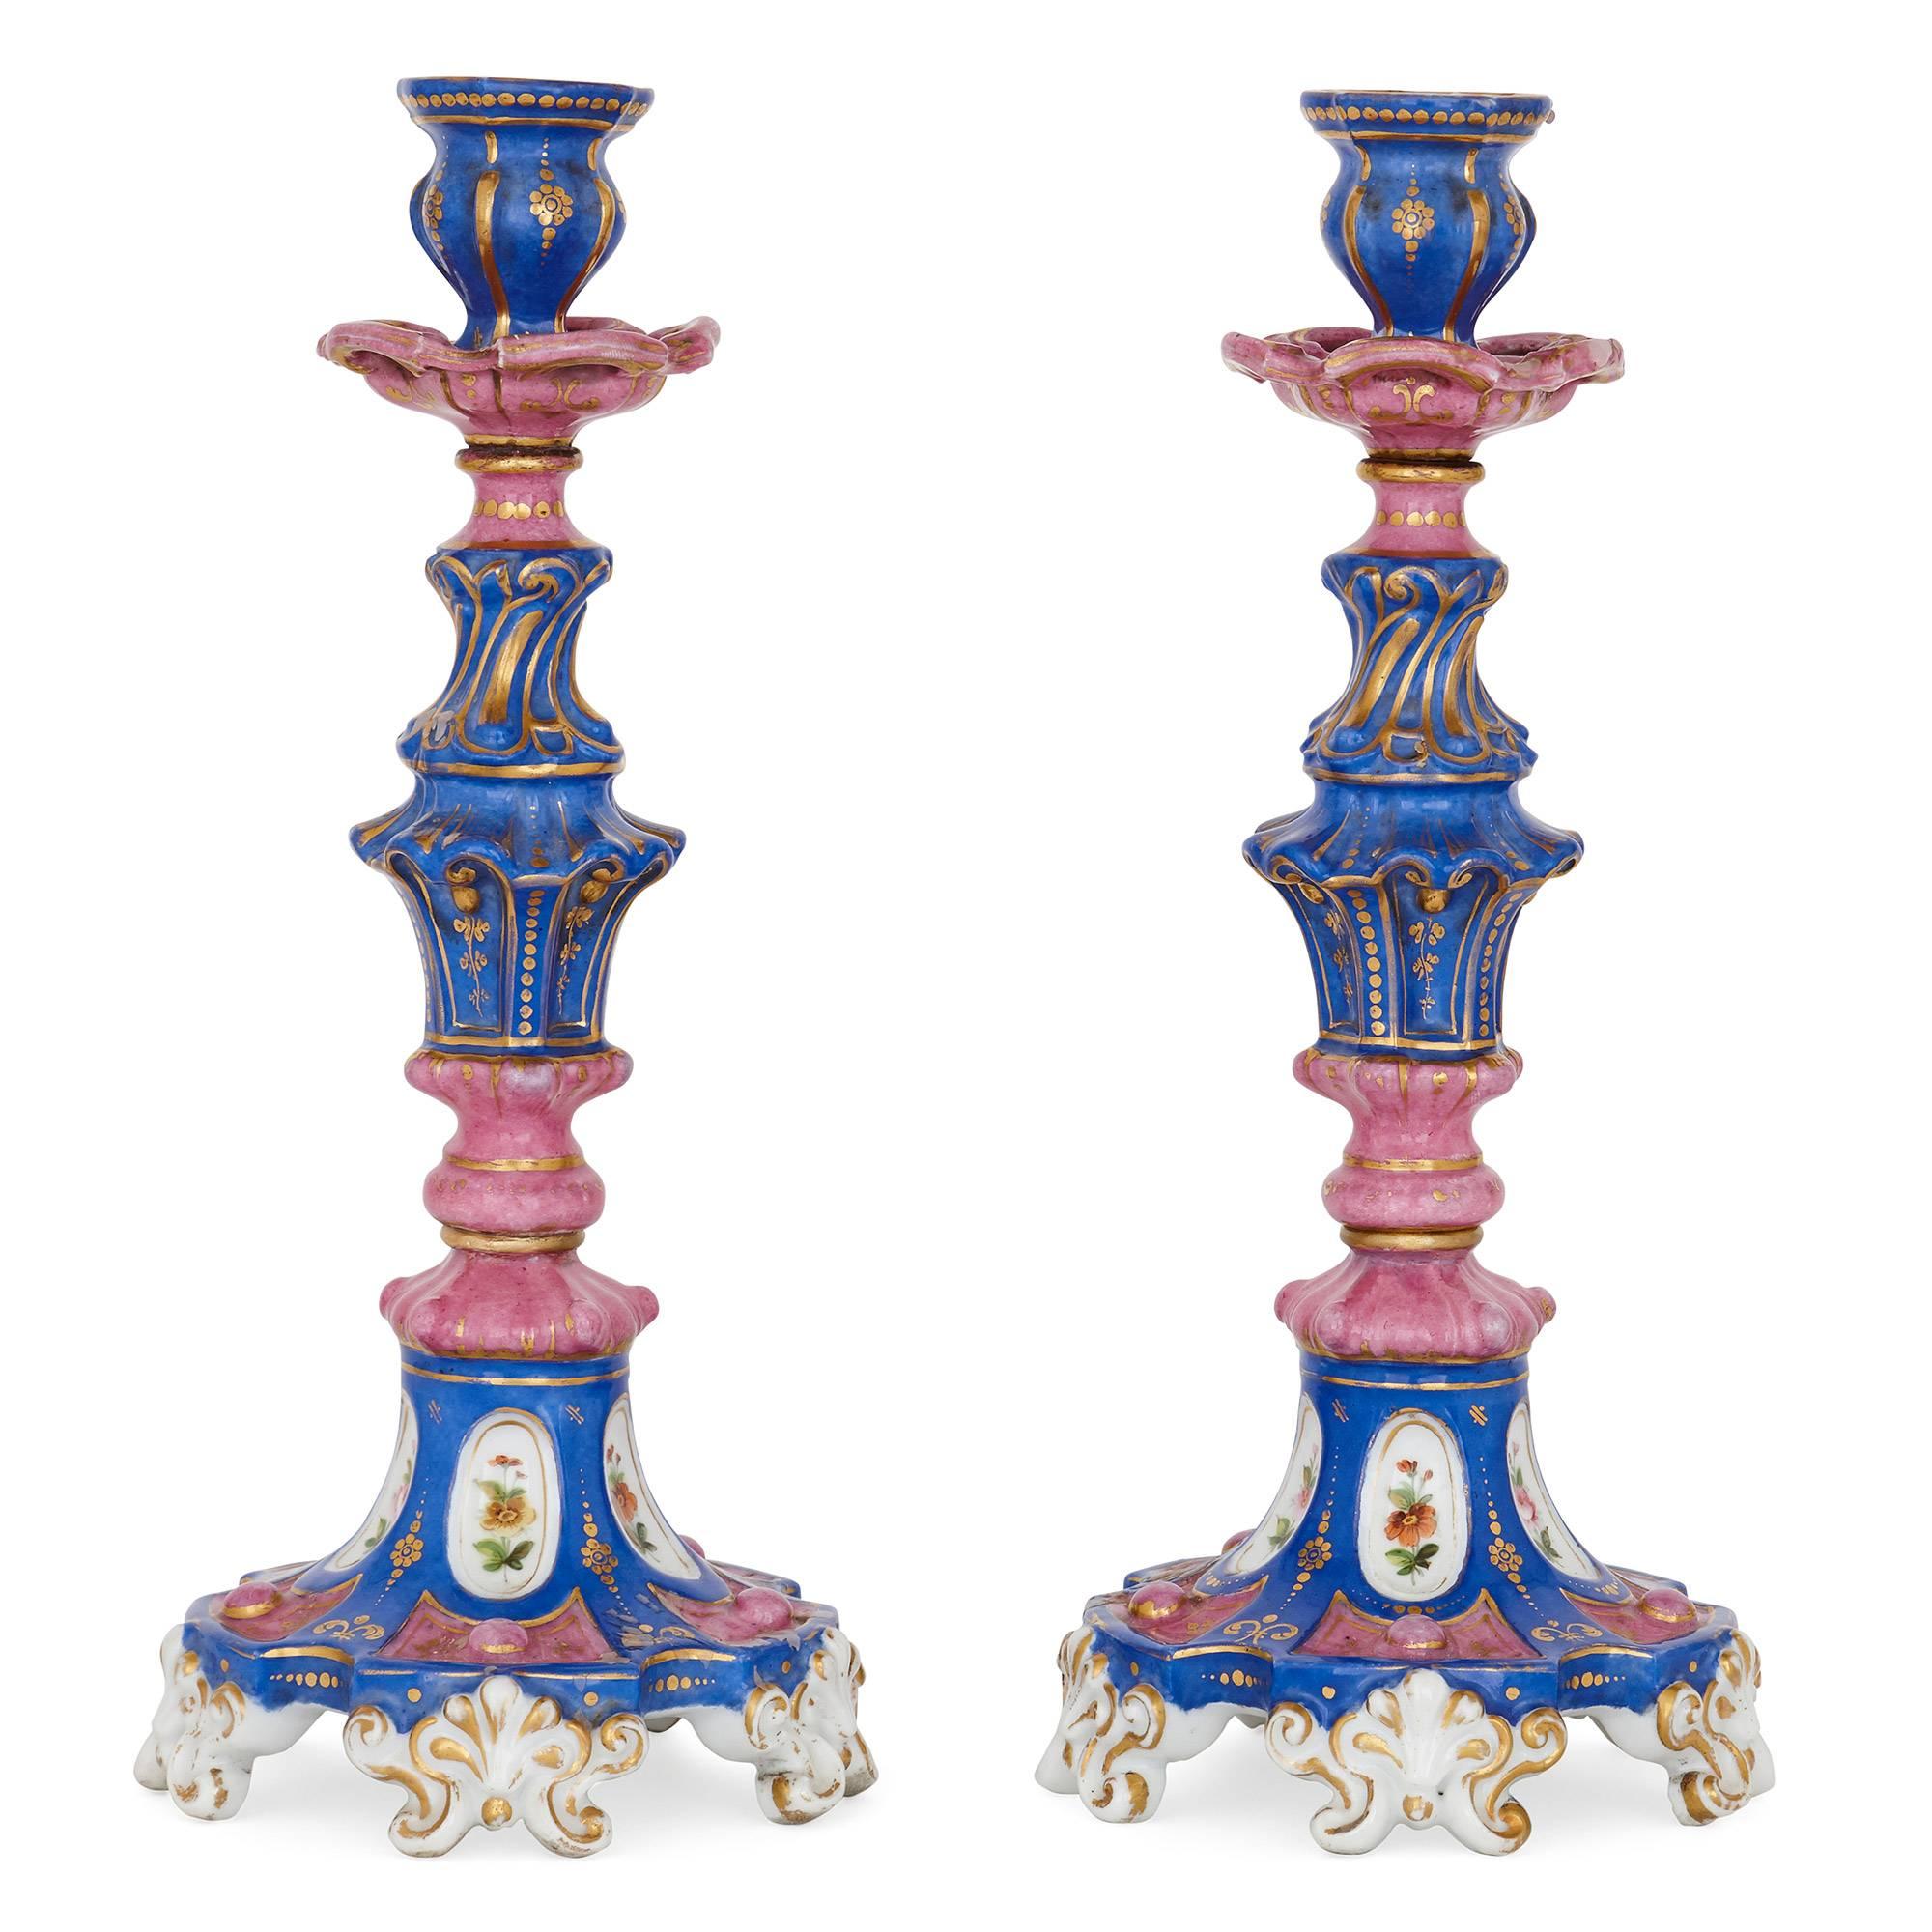 These exquisite porcelain candlesticks were made in the 19th century by the famous Russian Popov Manufactory.

The candlesticks are Rococo in their style. They feature knopped stems which are set on splayed bases on leaf-form feet. The stems